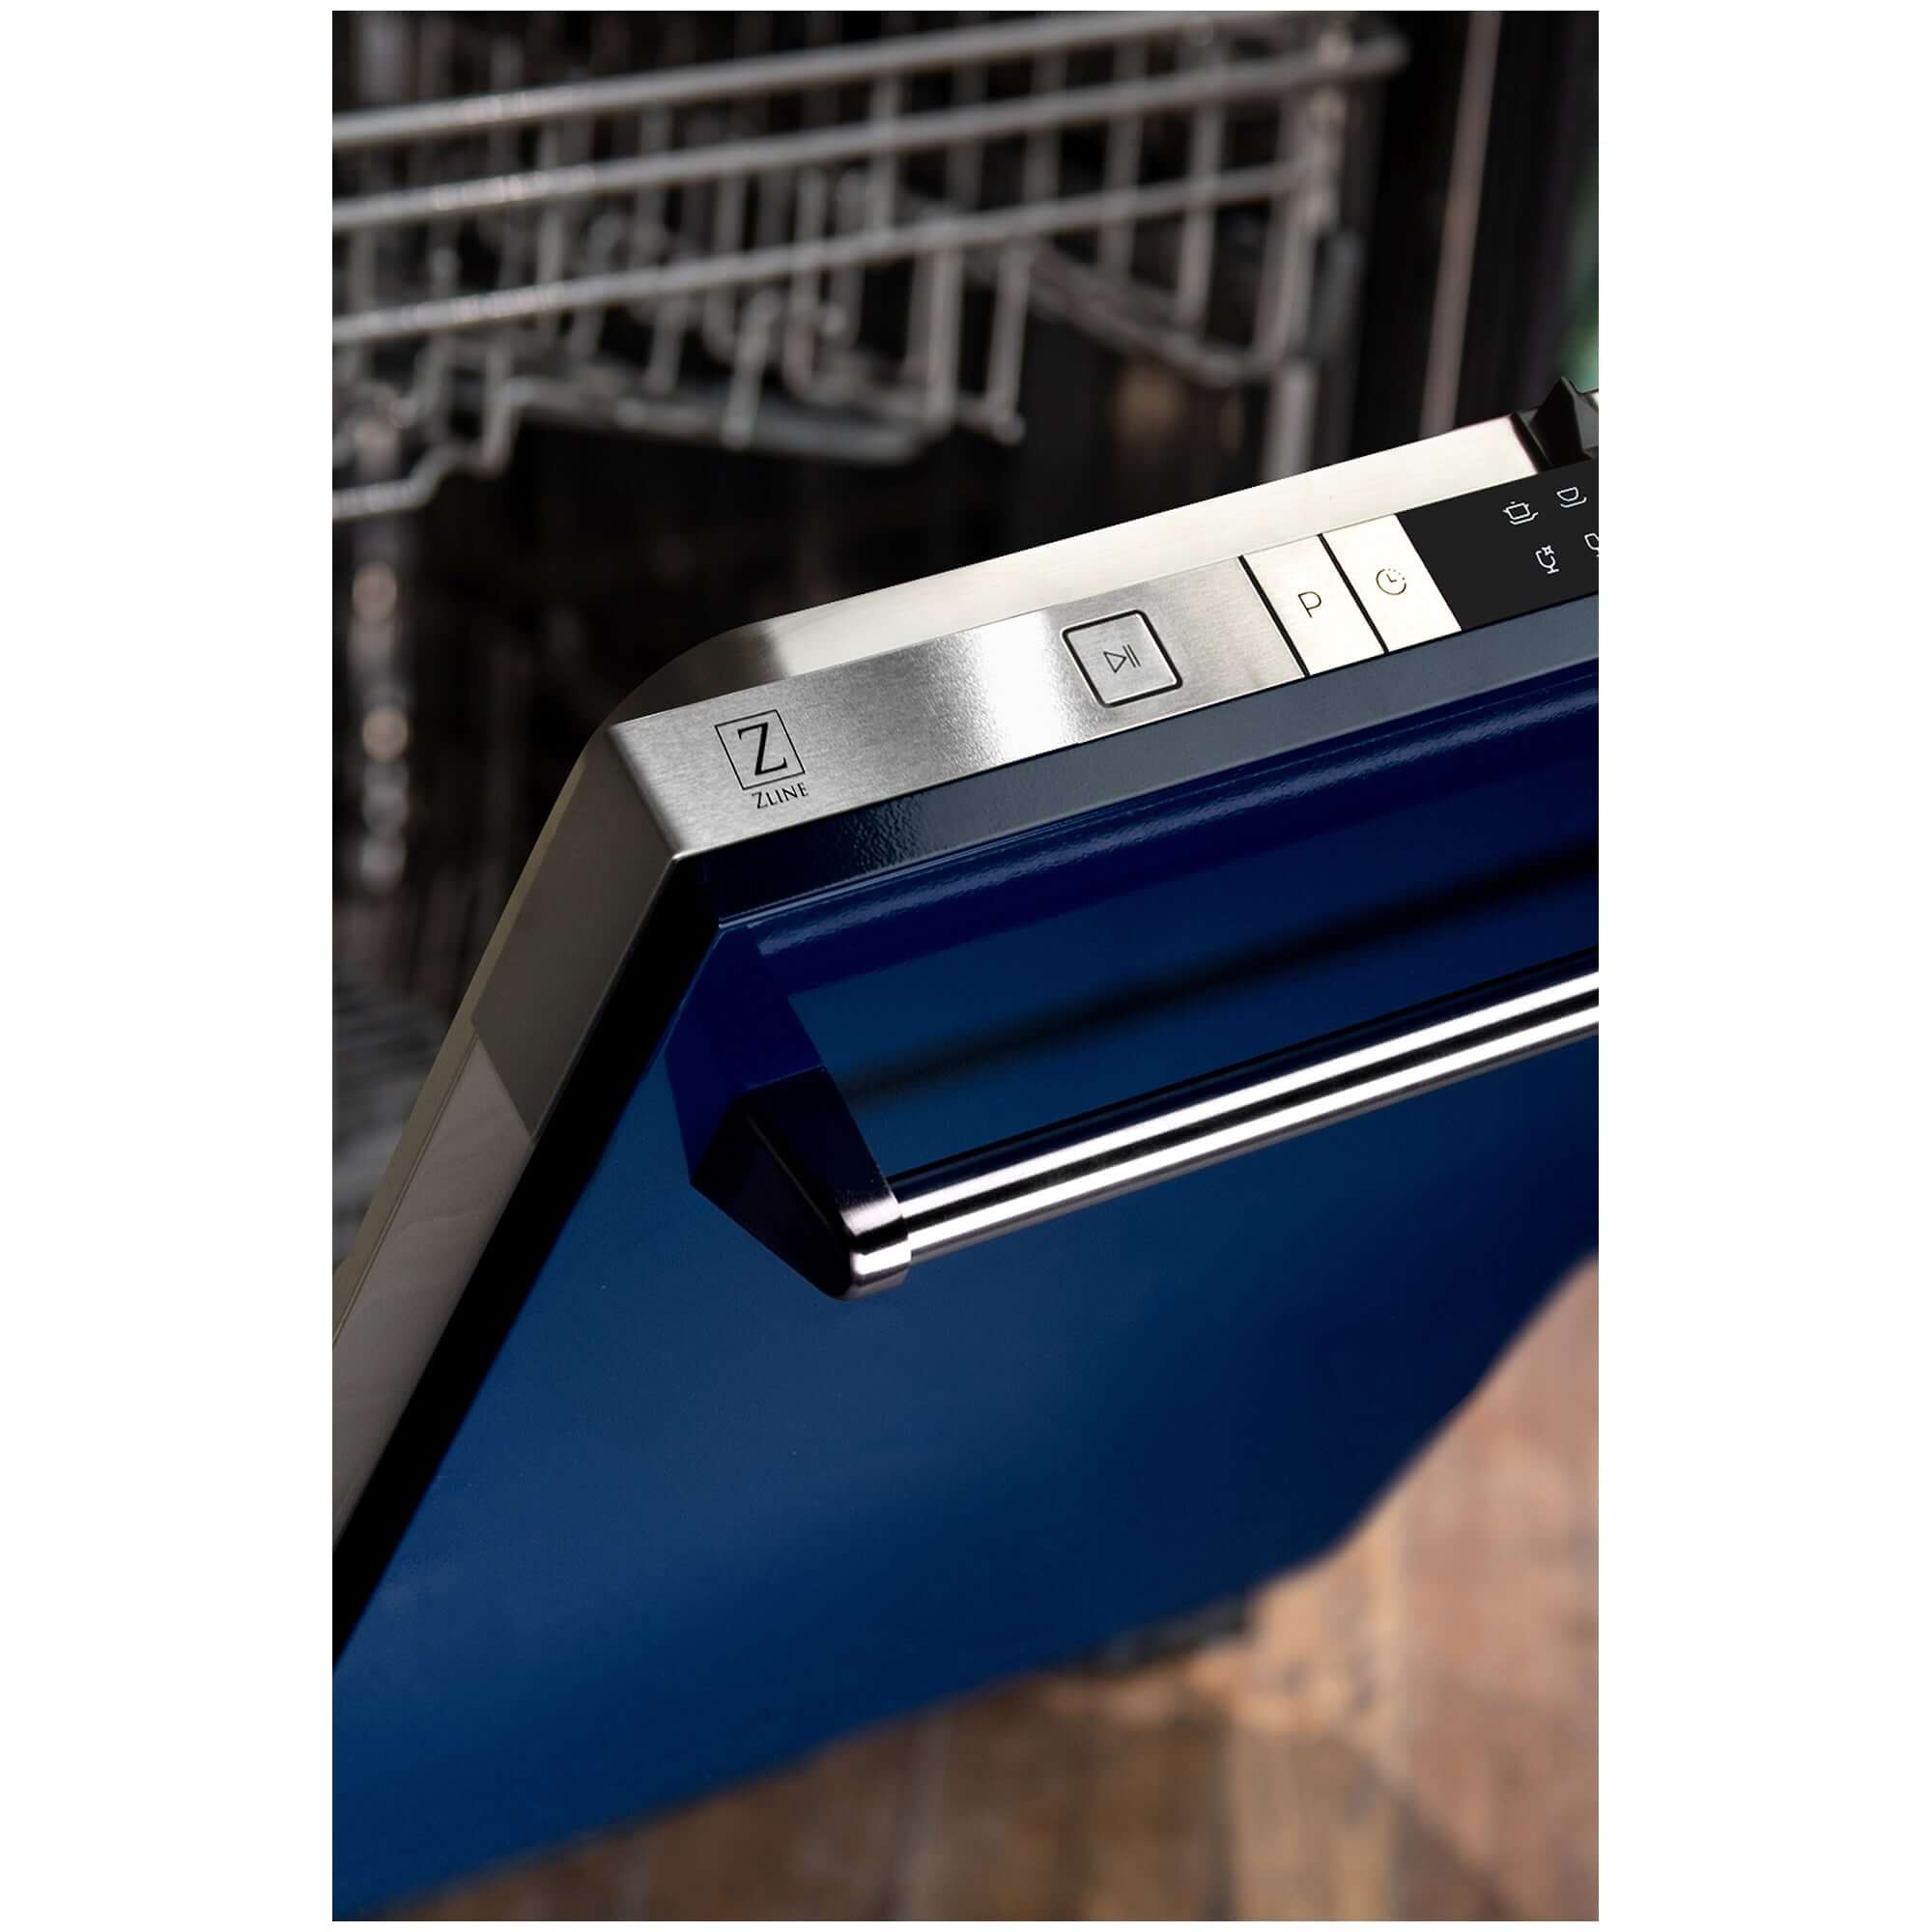 ZLINE 24 in. Blue Gloss Top Control Built-In Dishwasher with Stainless Steel Tub and Traditional Style Handle, 52dBa (DW-BG-24) built-in to cabinets in a luxury kitchen.